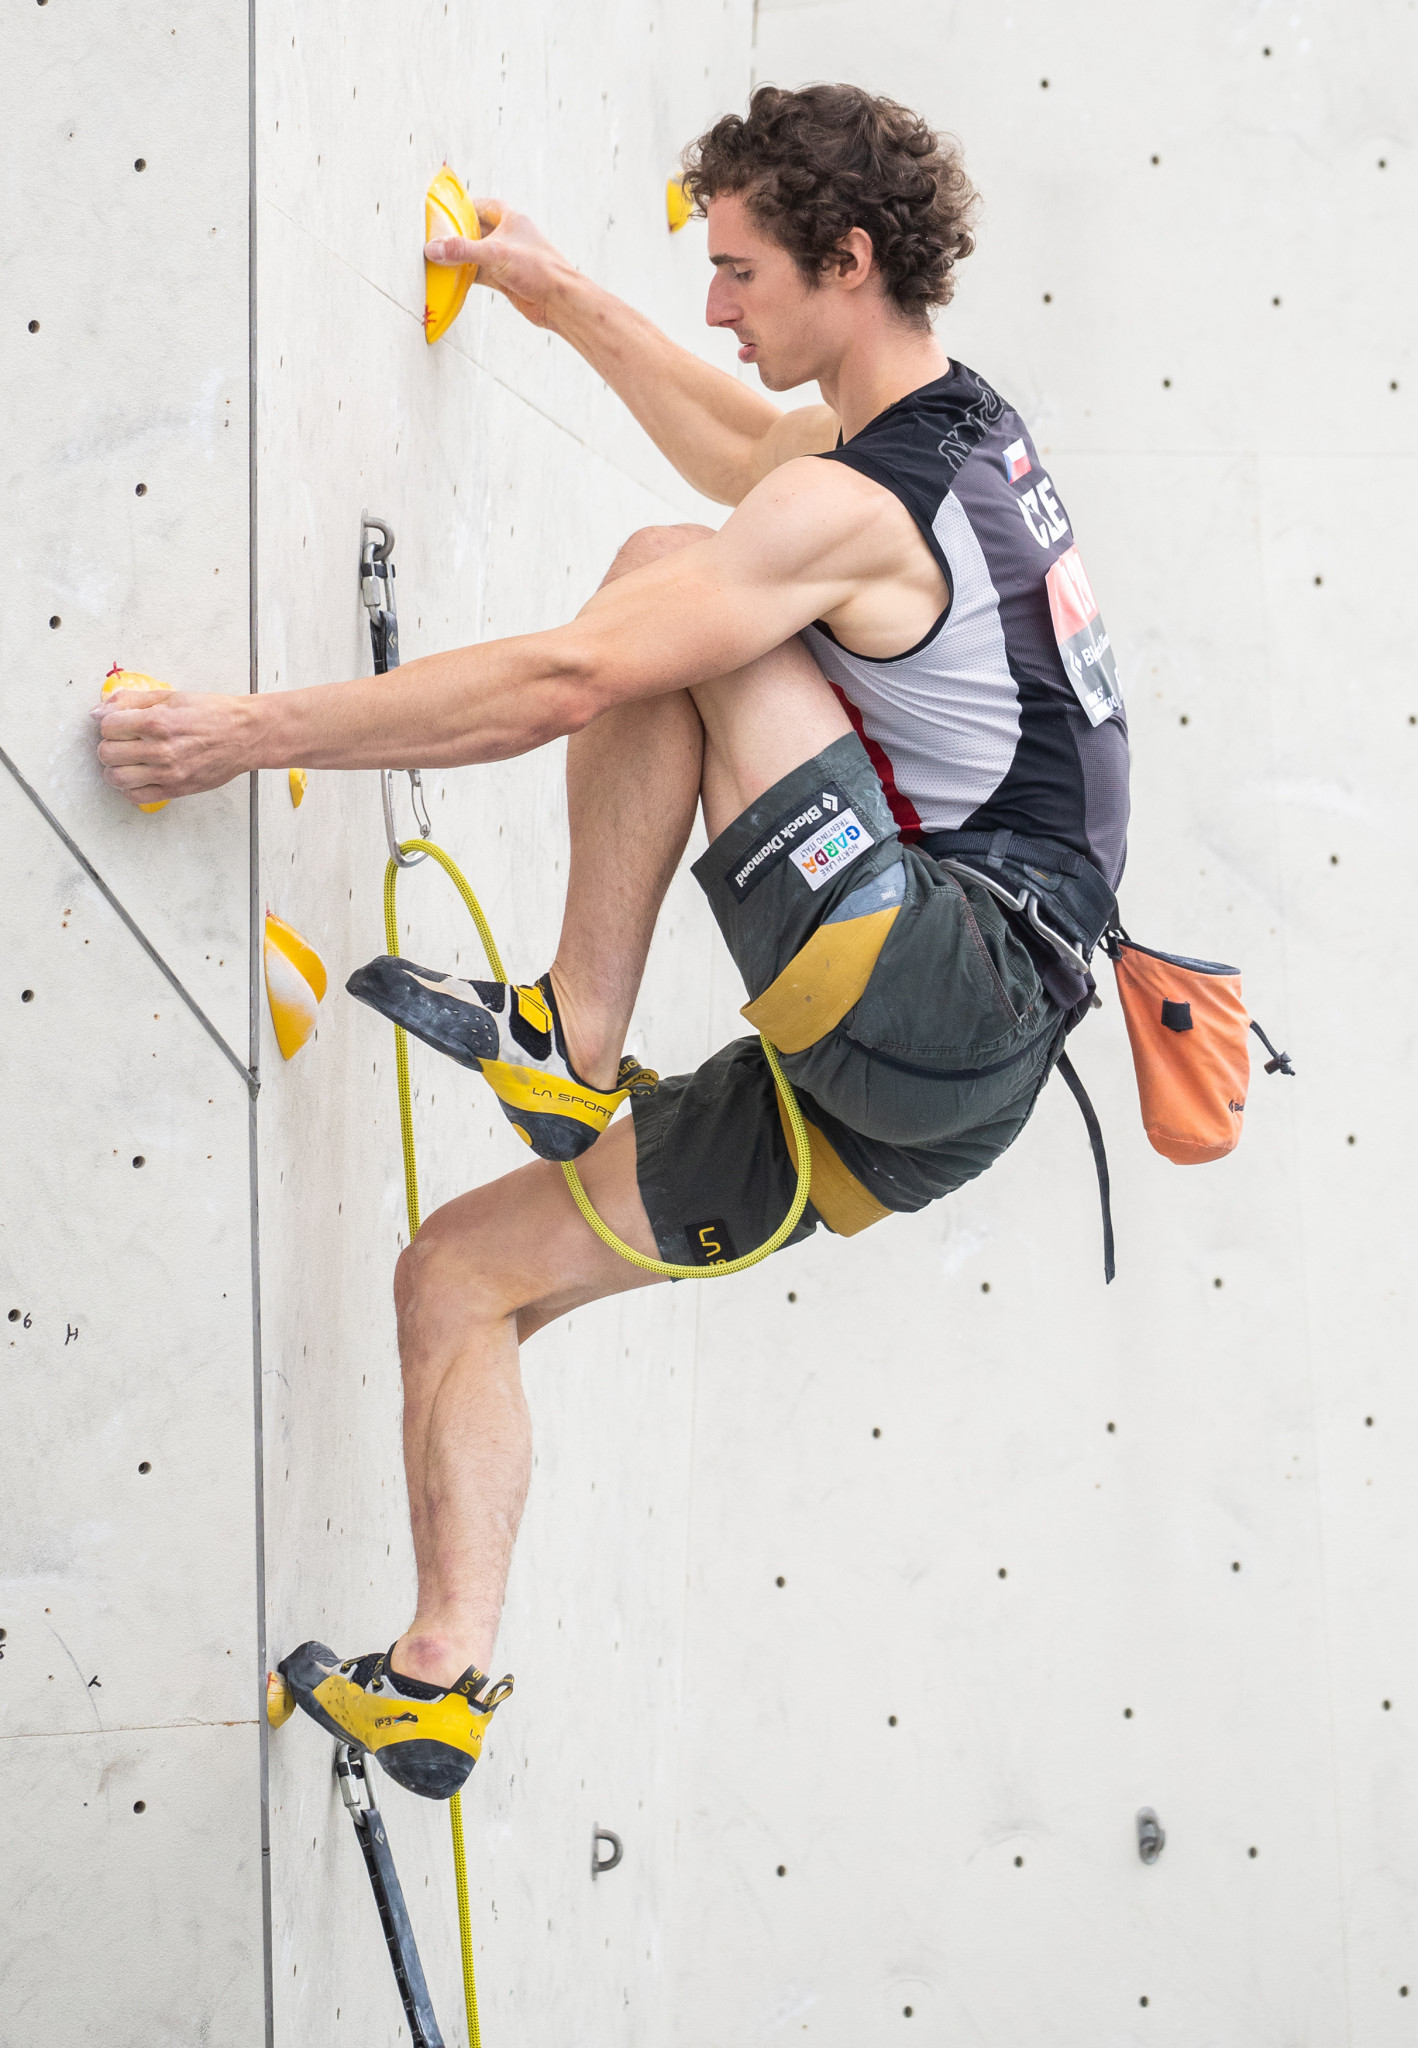 Adam Ondra en-route to winning the qualification in the lead event at the IFSC World Climbing and Paraclimbing Championships in Innsbruck ©IFSC